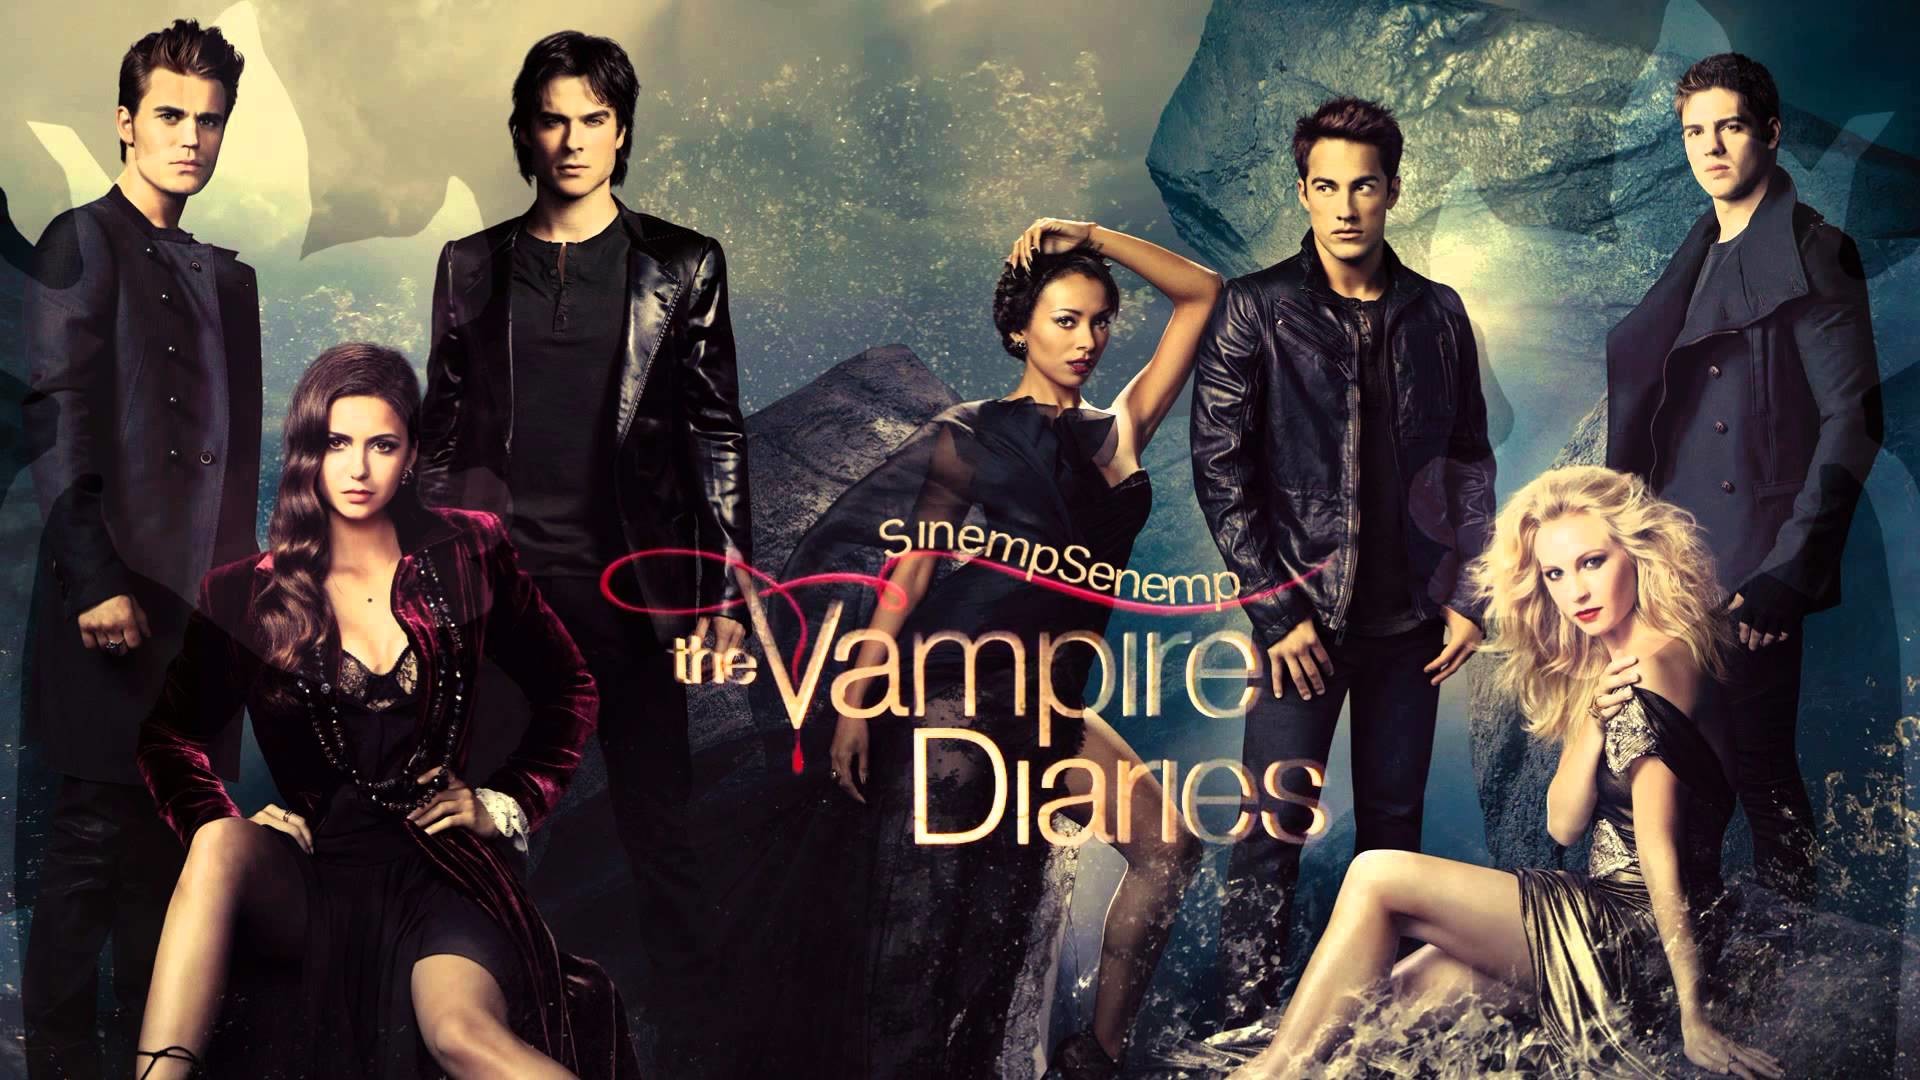 1920x1080 The Vampire Diaries Season 6 Episodes 1 - 22 | Movies and TV Series |  Pinterest | TVs and Movie